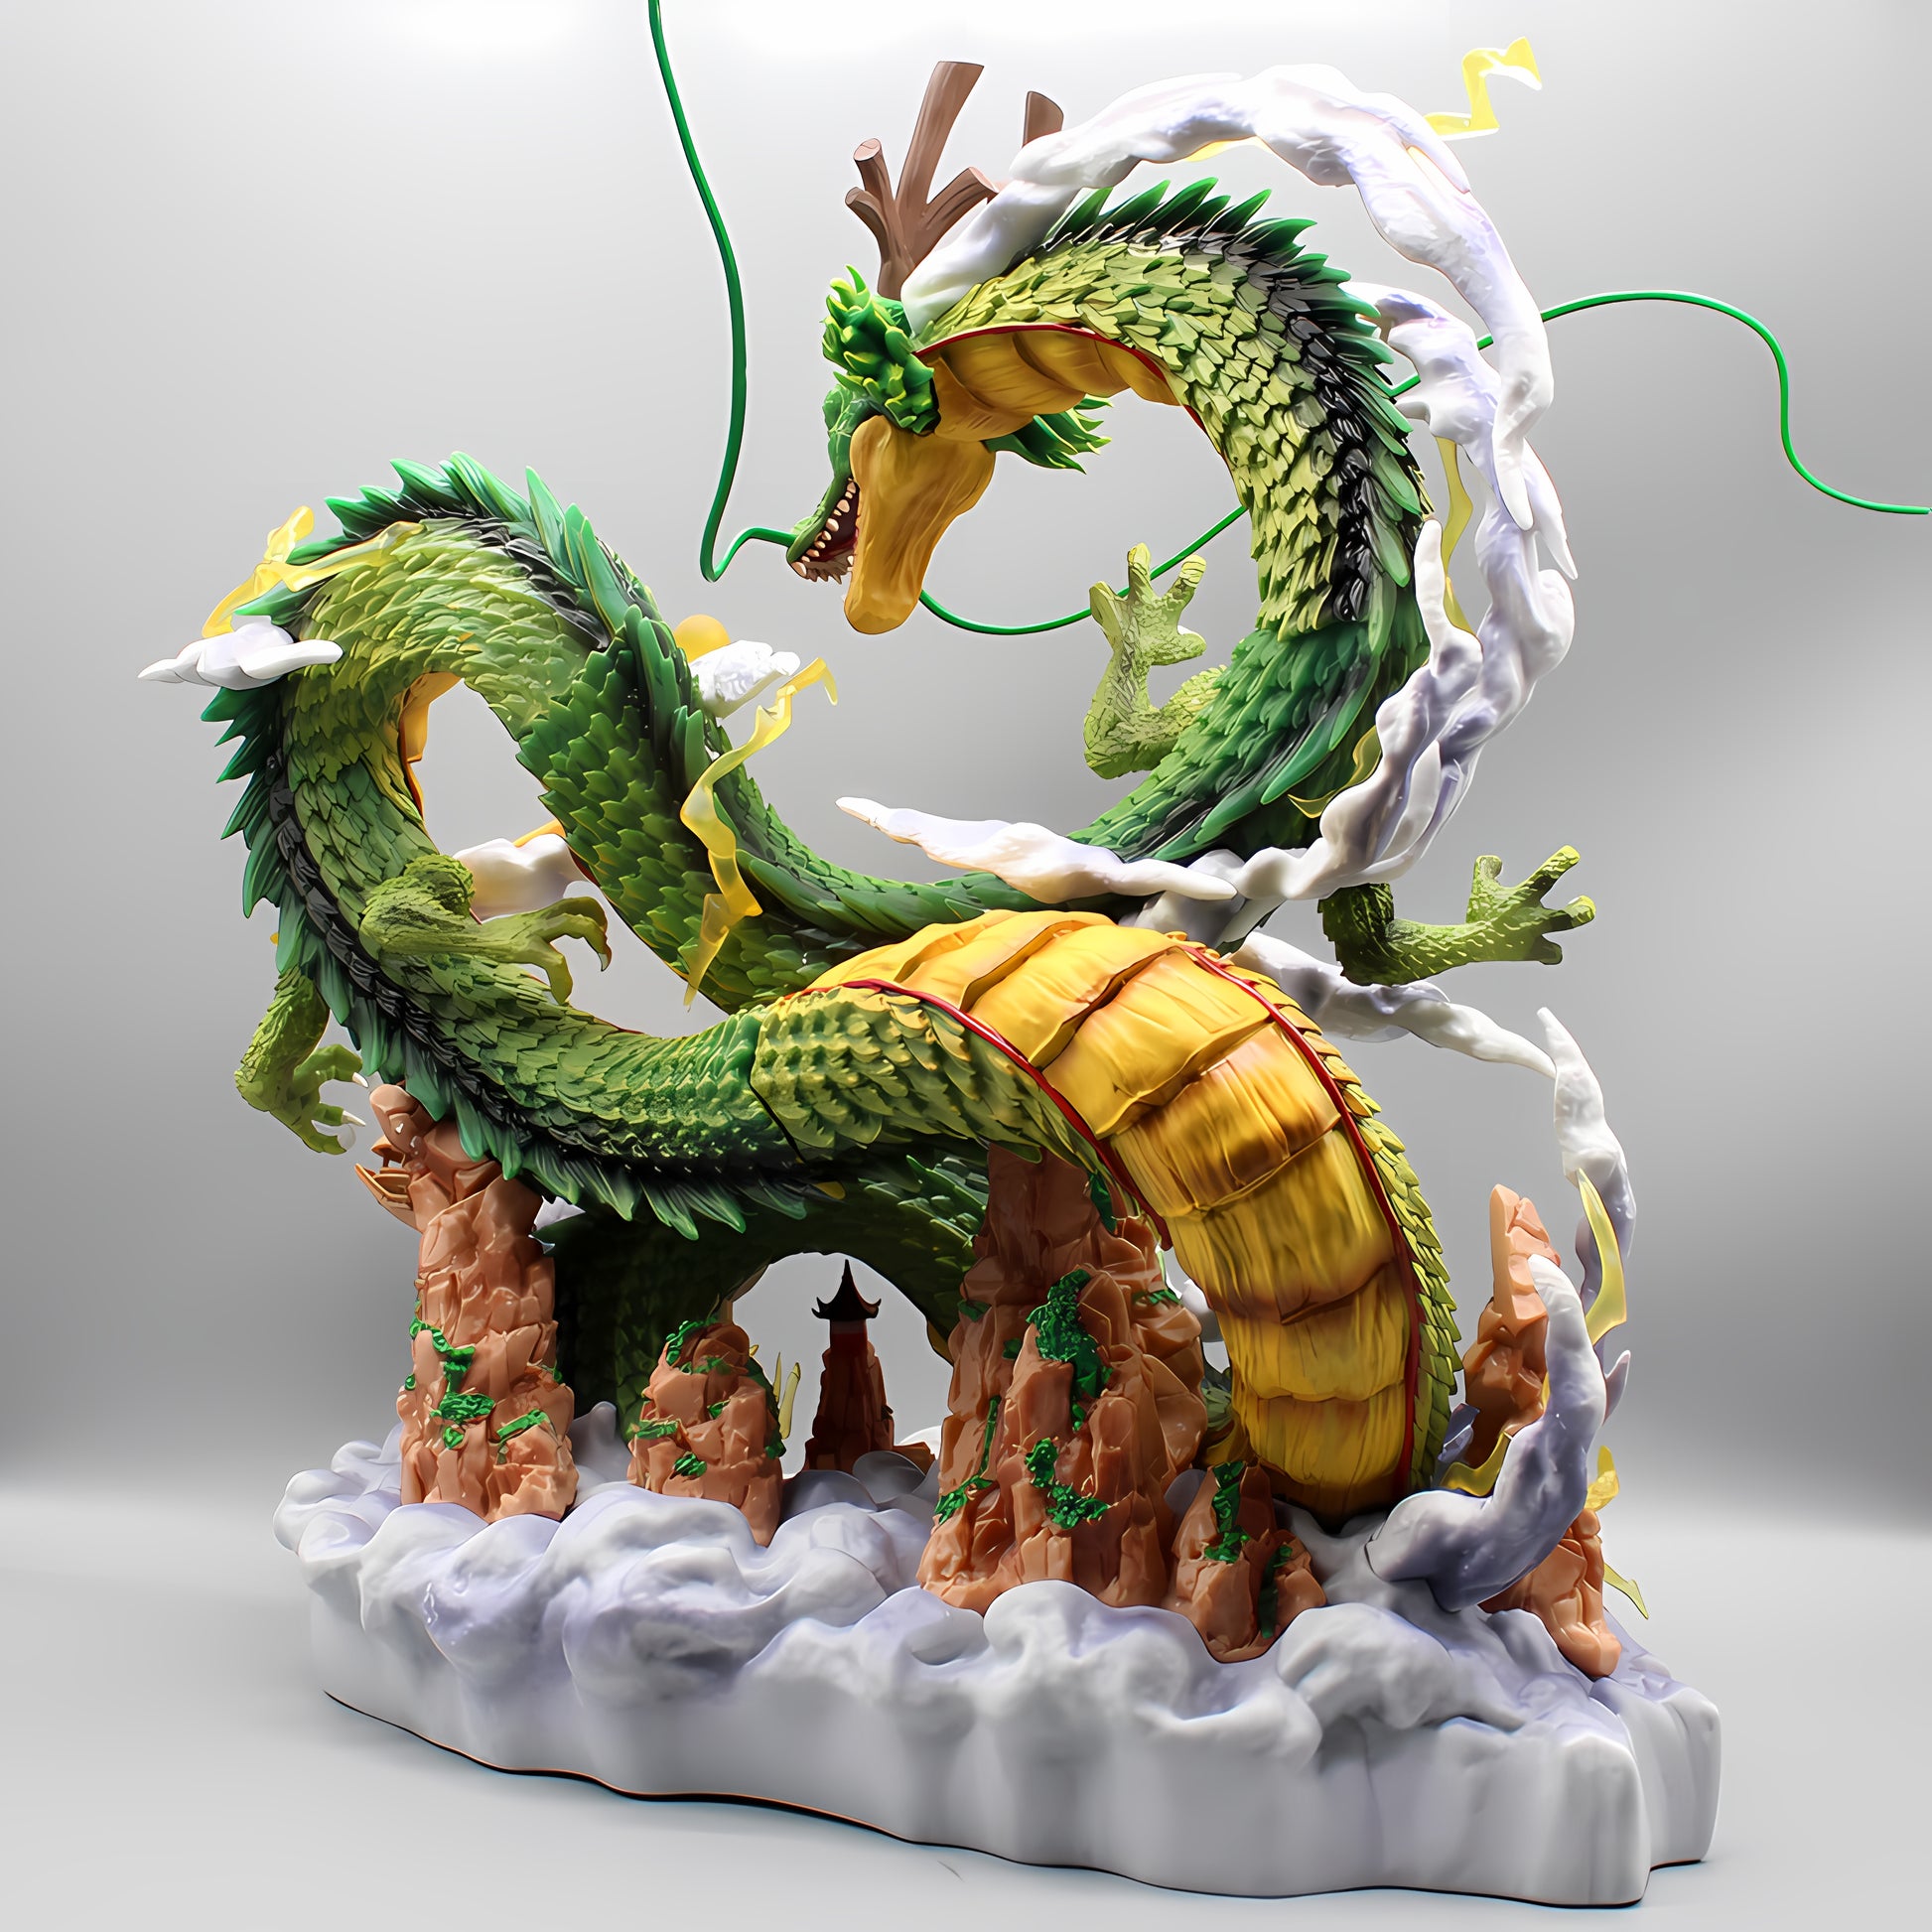 This collectible figurine captures Shenron from Dragon Ball Z in a moment of mystical majesty, with its green and yellow scaled body sinuously curving around a rocky base amid billowing white clouds. The attention to detail is evident in the dragon's fearsome expression and the delicate work on the rocks and clouds, all set upon a subtle grey gradient background, enhancing the three-dimensionality of the statue.